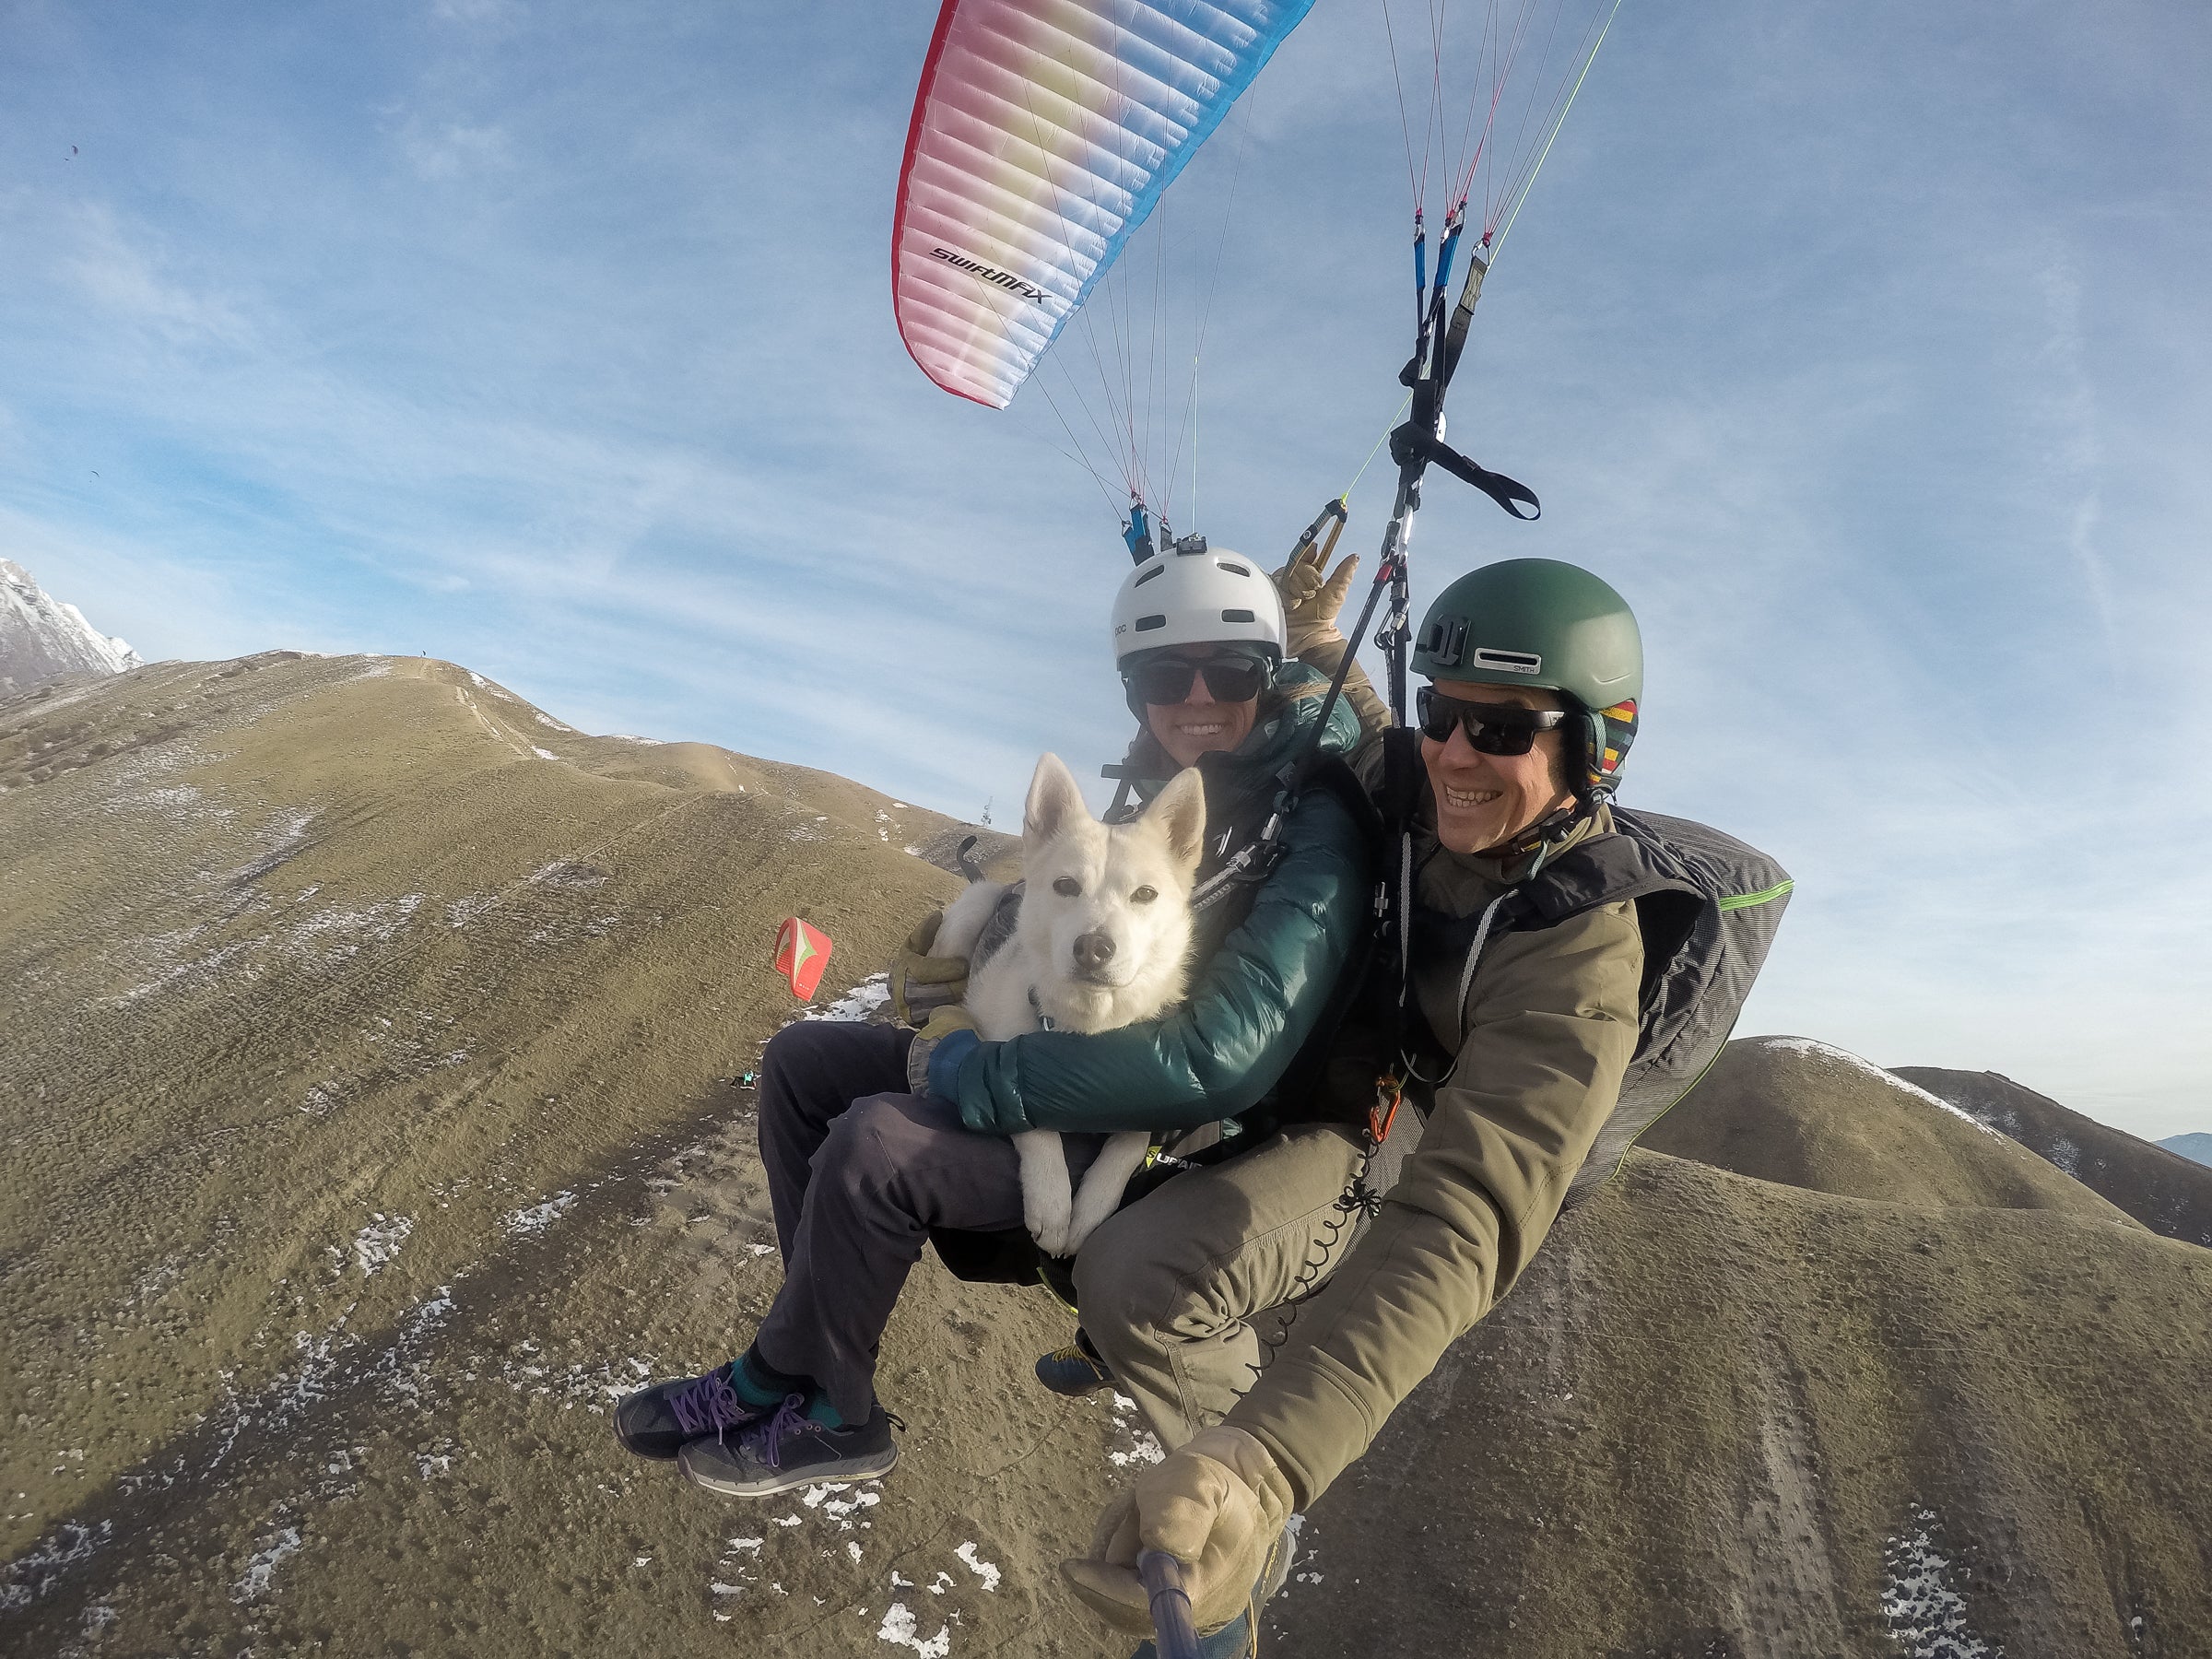 Man and woman tandem paragliding with their dog